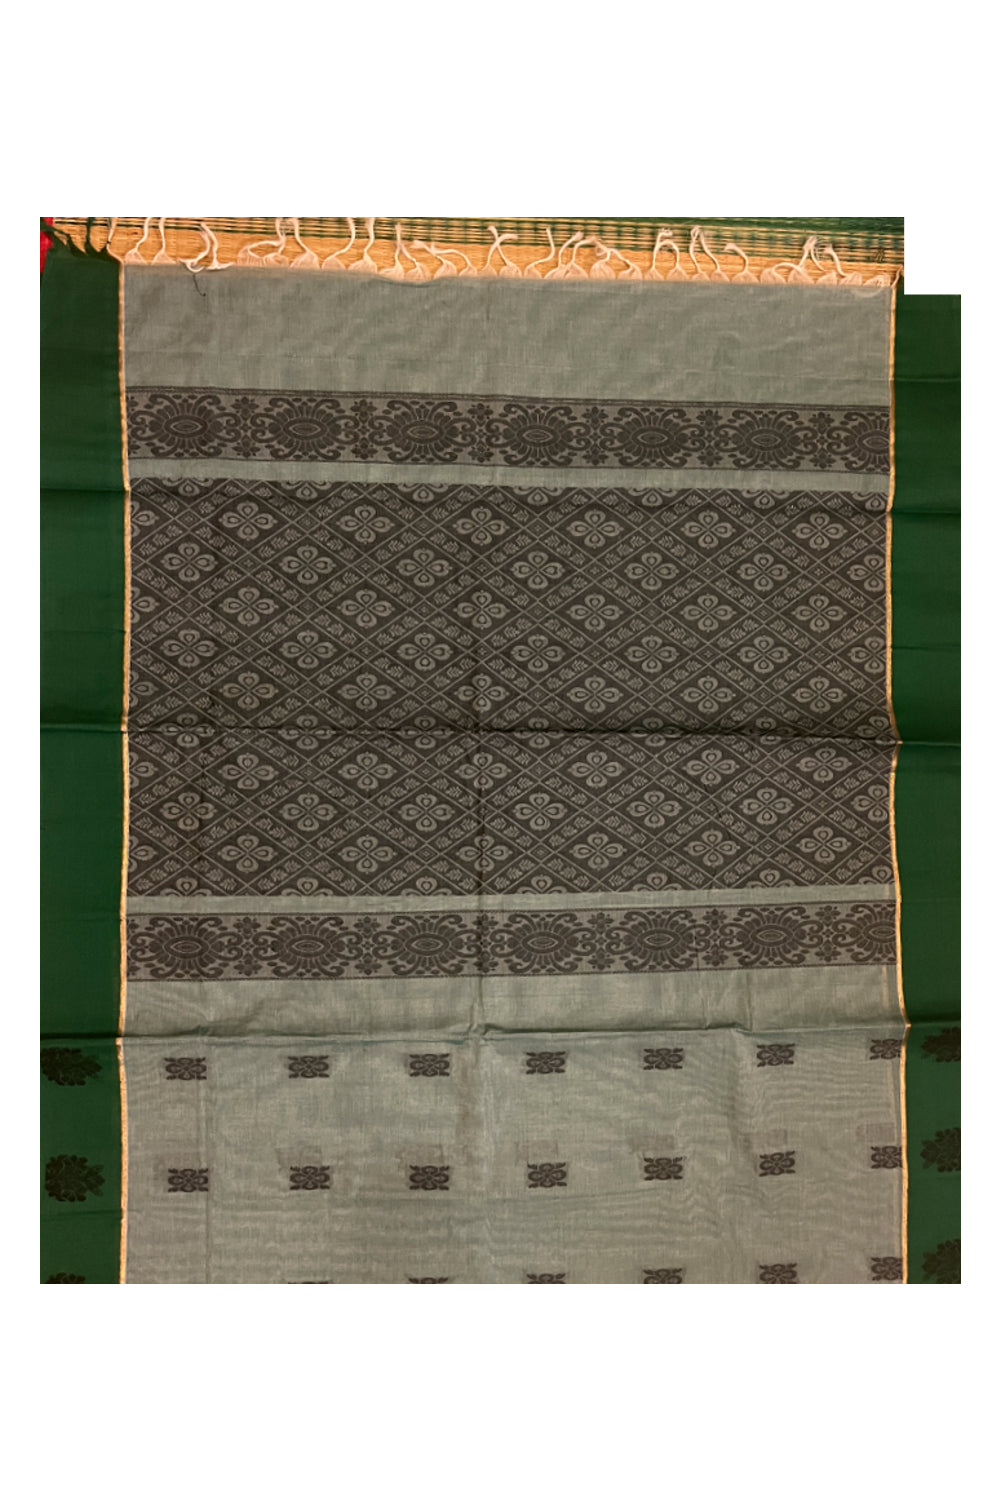 Southloom Cotton Green Saree with Woven Butta Works on Body